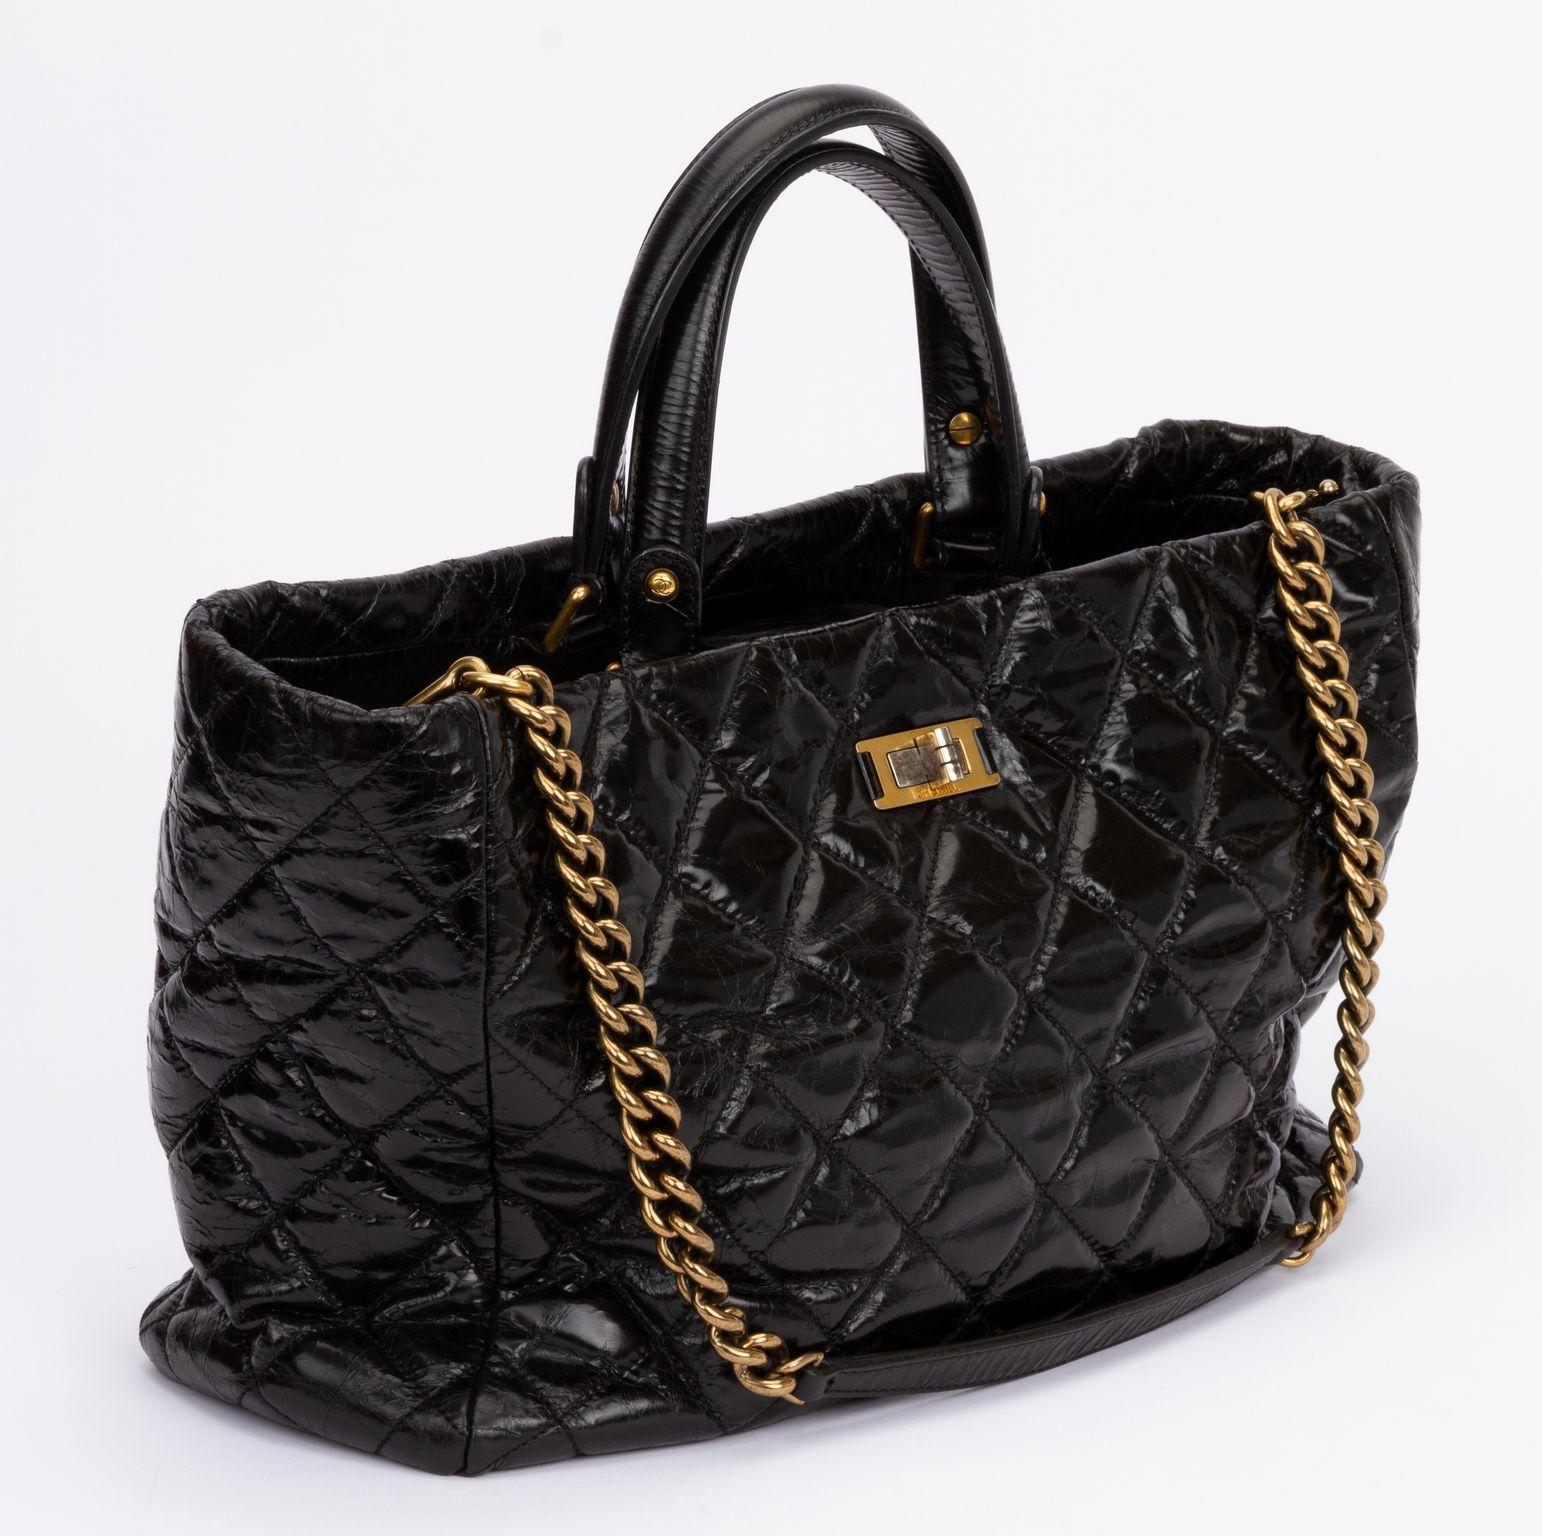 Chanel black brushed leather reissue tote. Two tone hardware. Detachable shoulder strap (drop 13